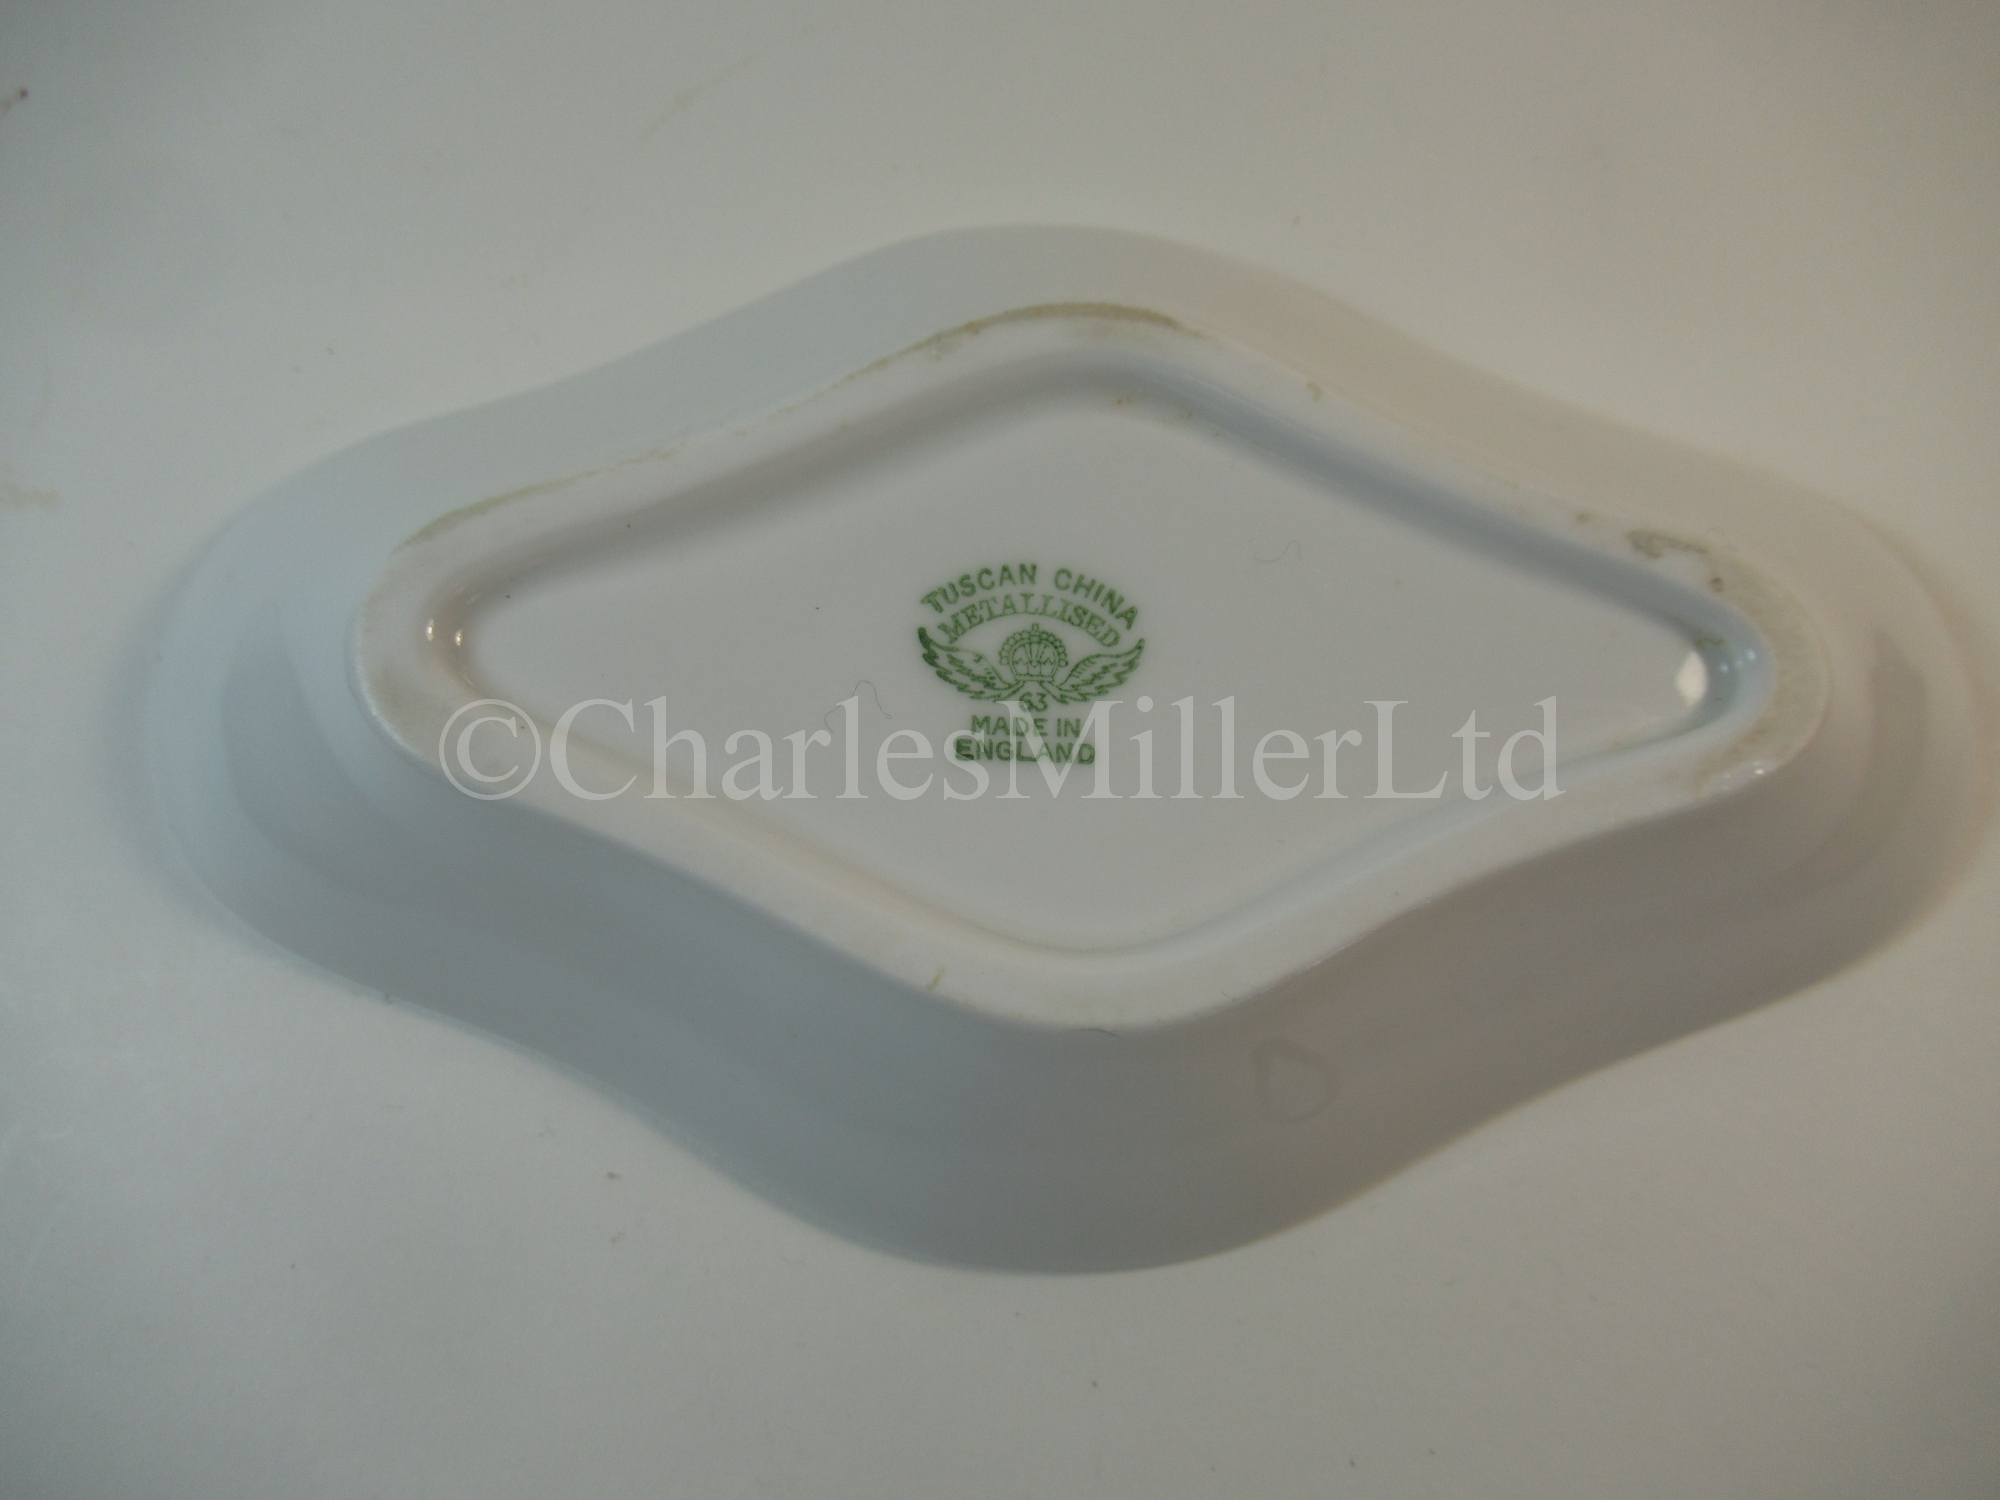 A Caledonian Steam Packet Company Irish Services Ltd oval dish - Image 4 of 6